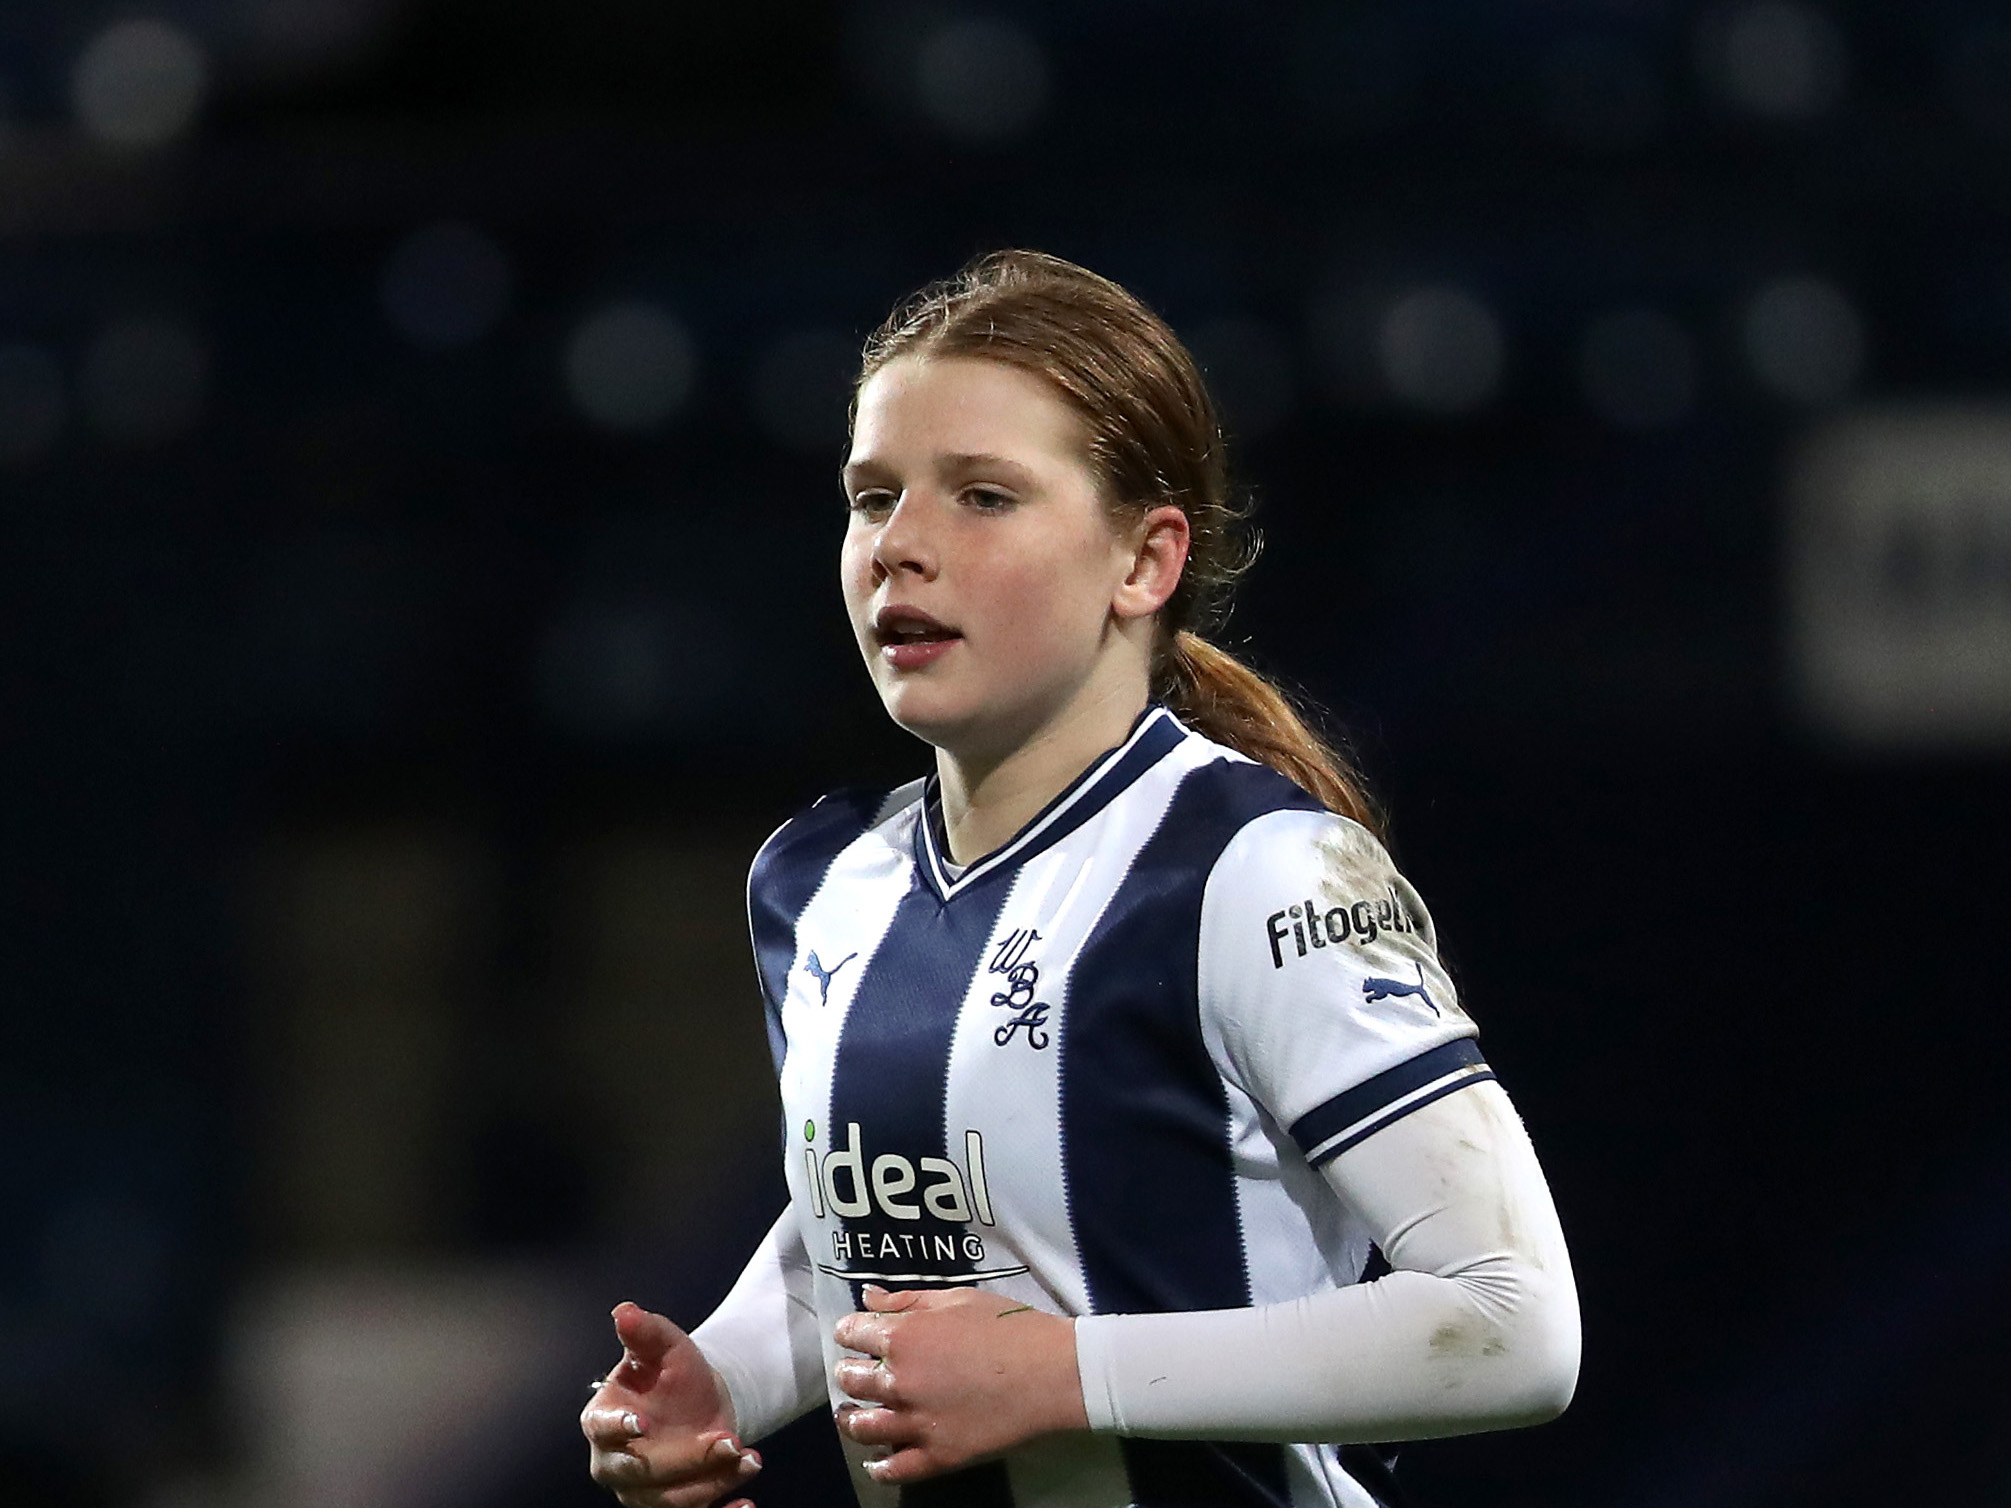 West Bromwich Albion Women to play at Hednesford Town FC - SheKicks